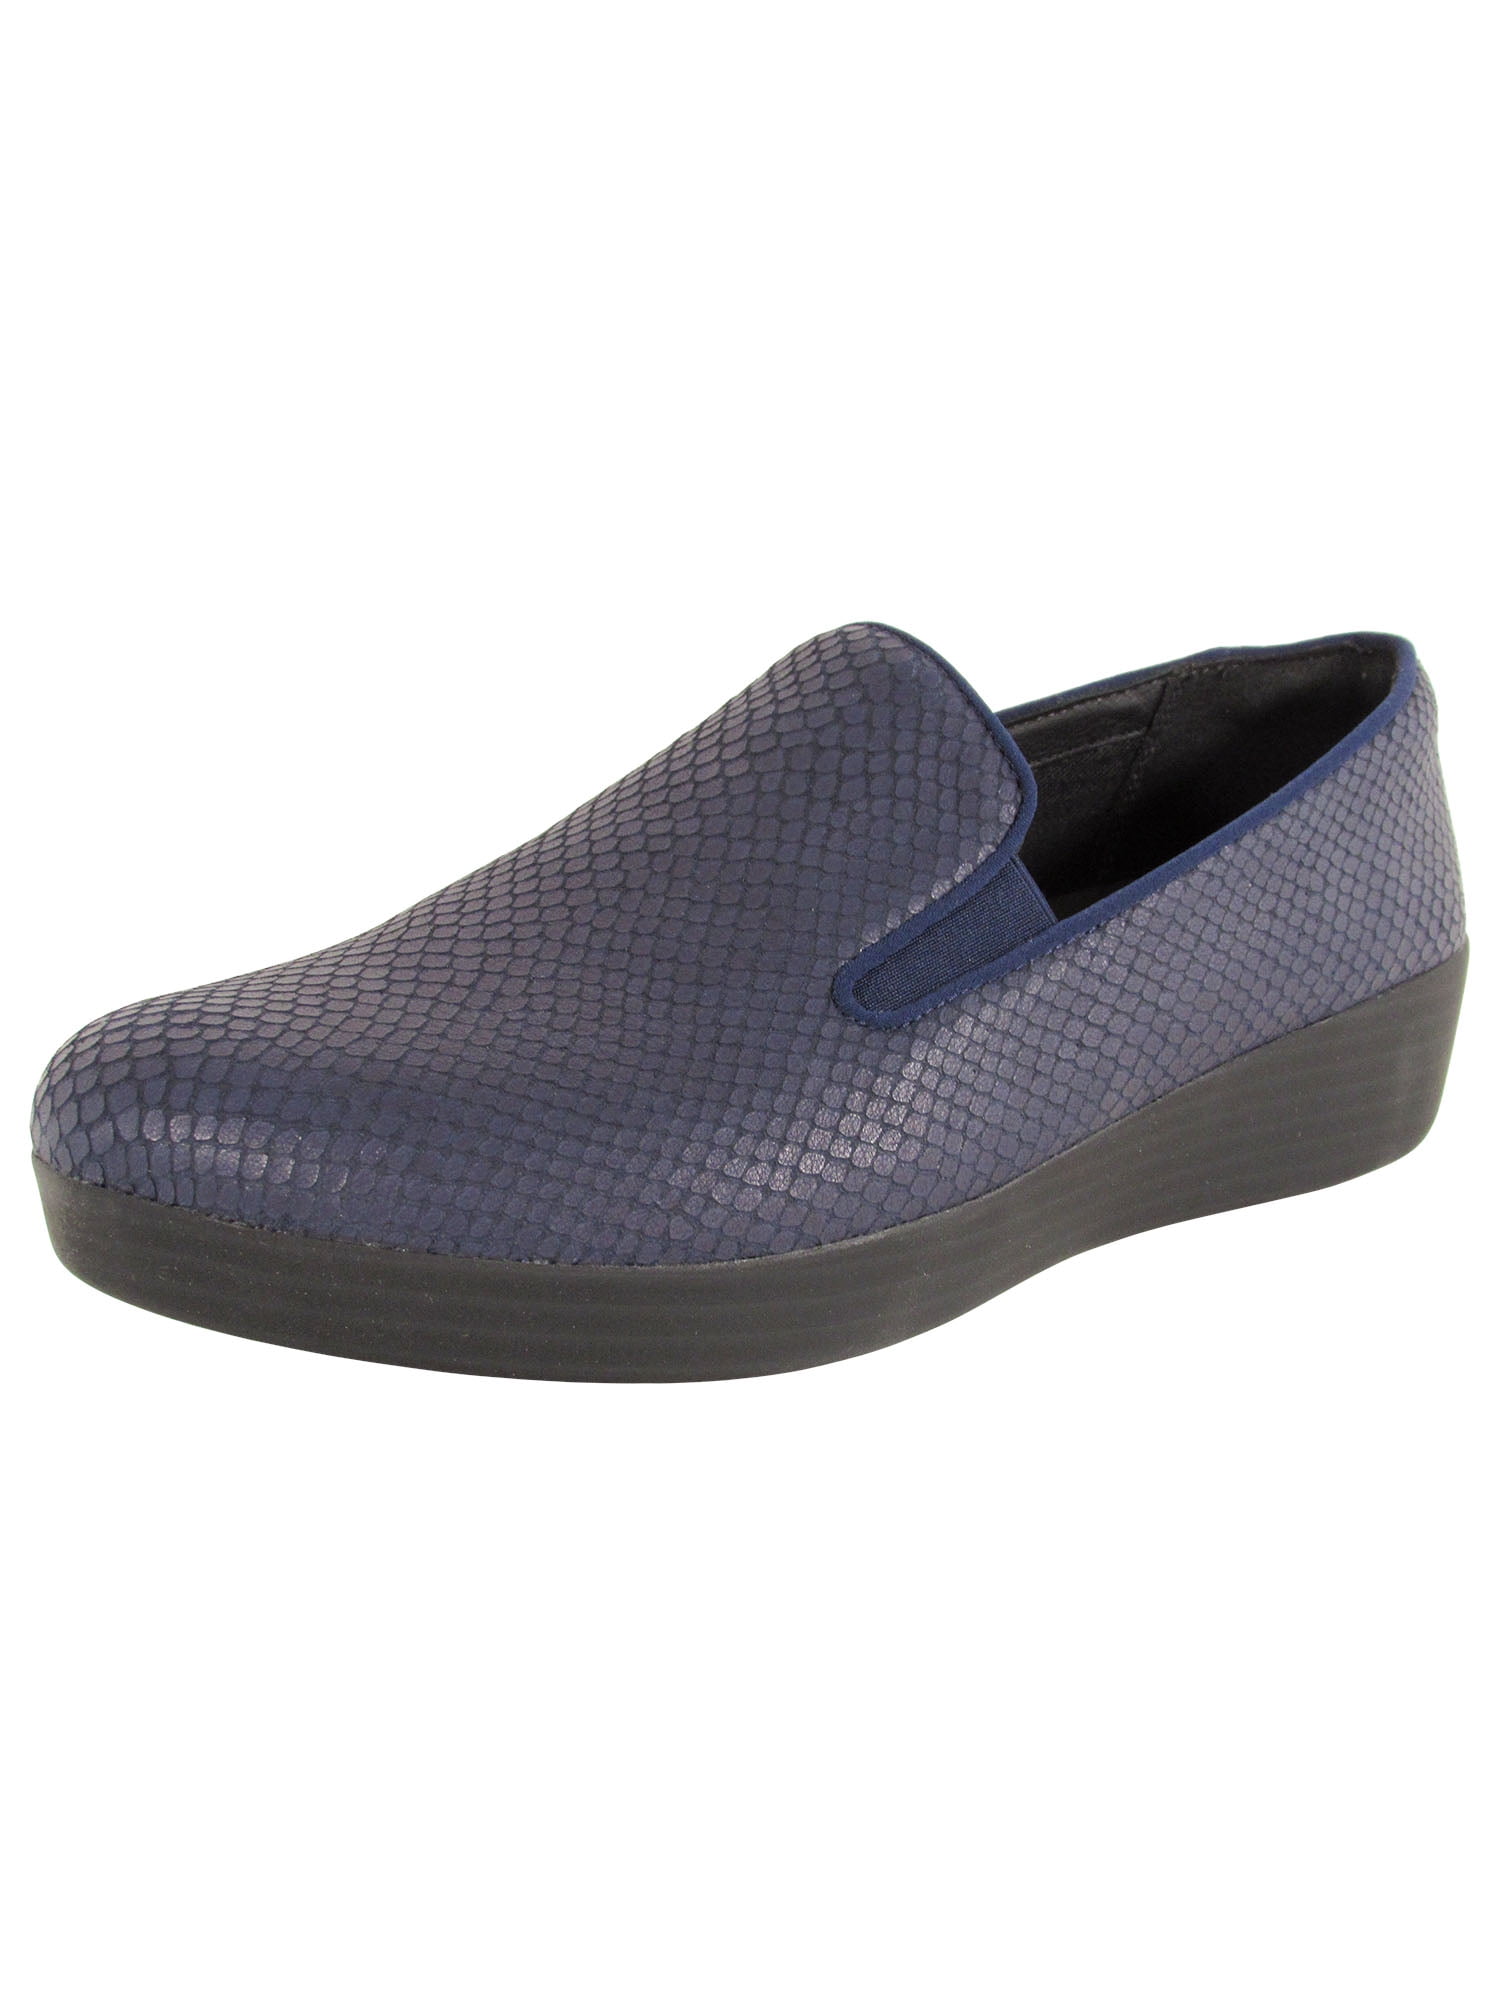 FitFlop - Fitflop Womens Superskate Snake Print Loafer Shoes - Walmart.com